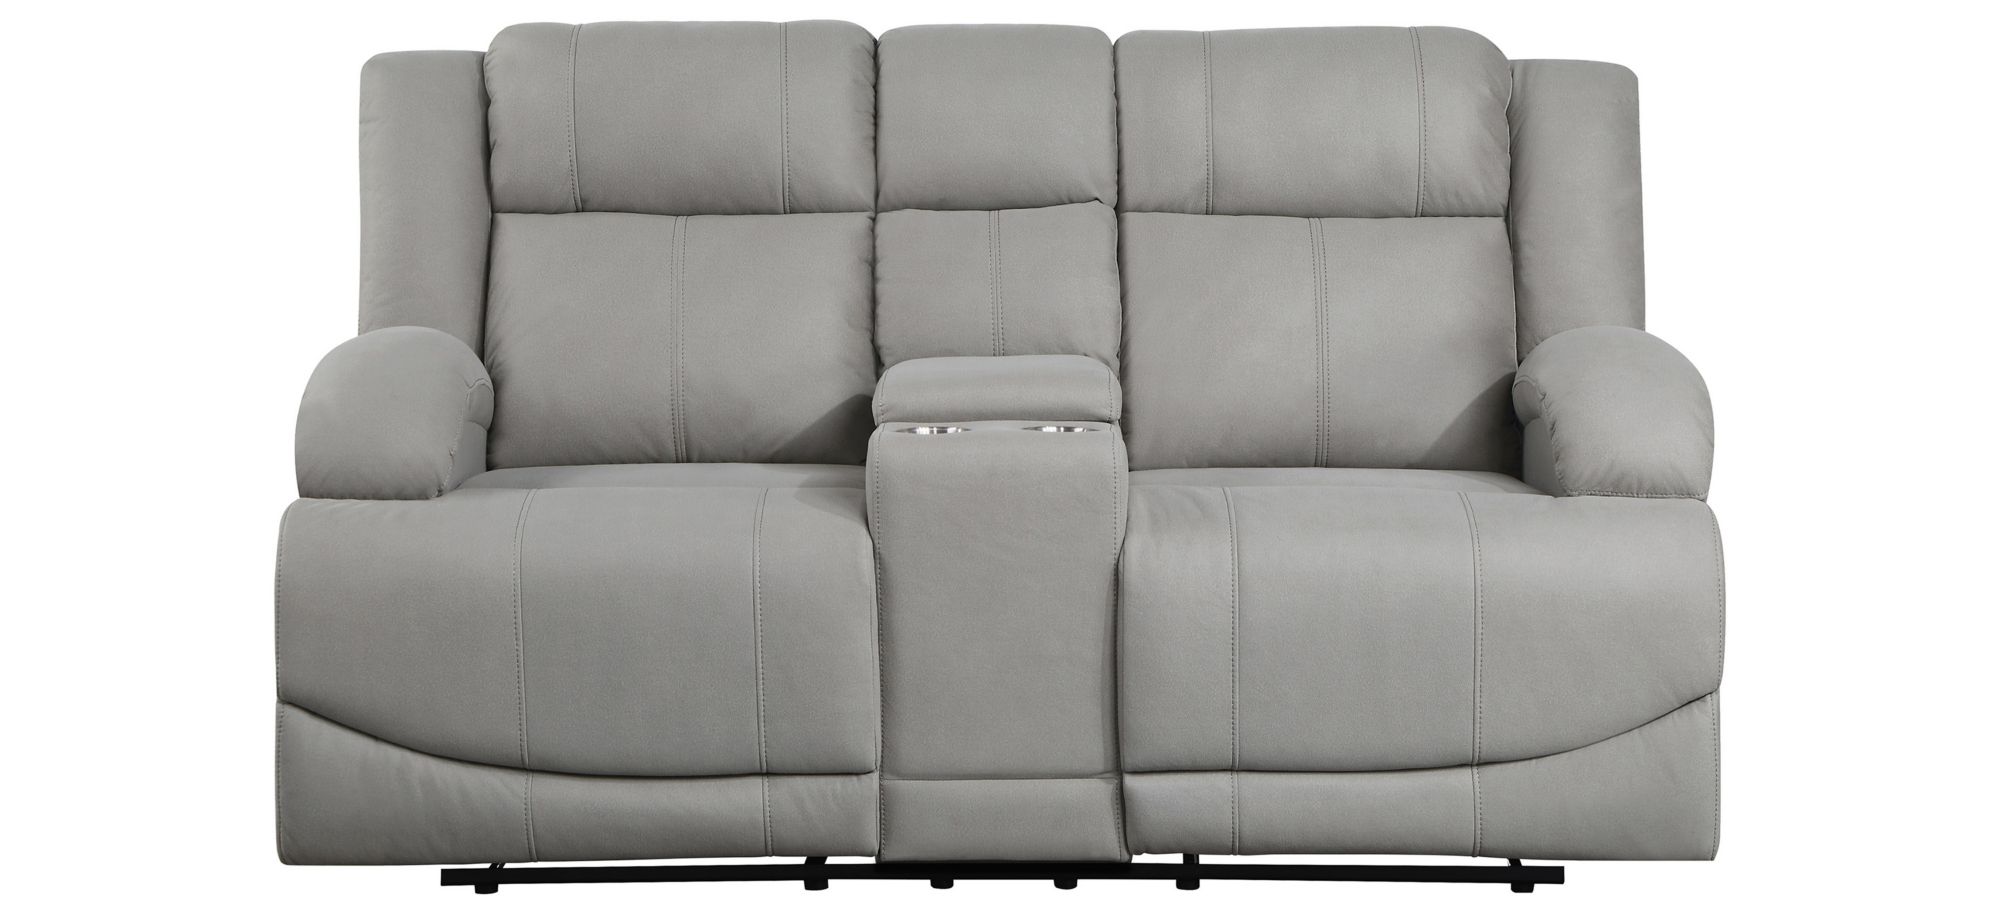 Brennen Reclining Console Loveseat in Gray by Homelegance